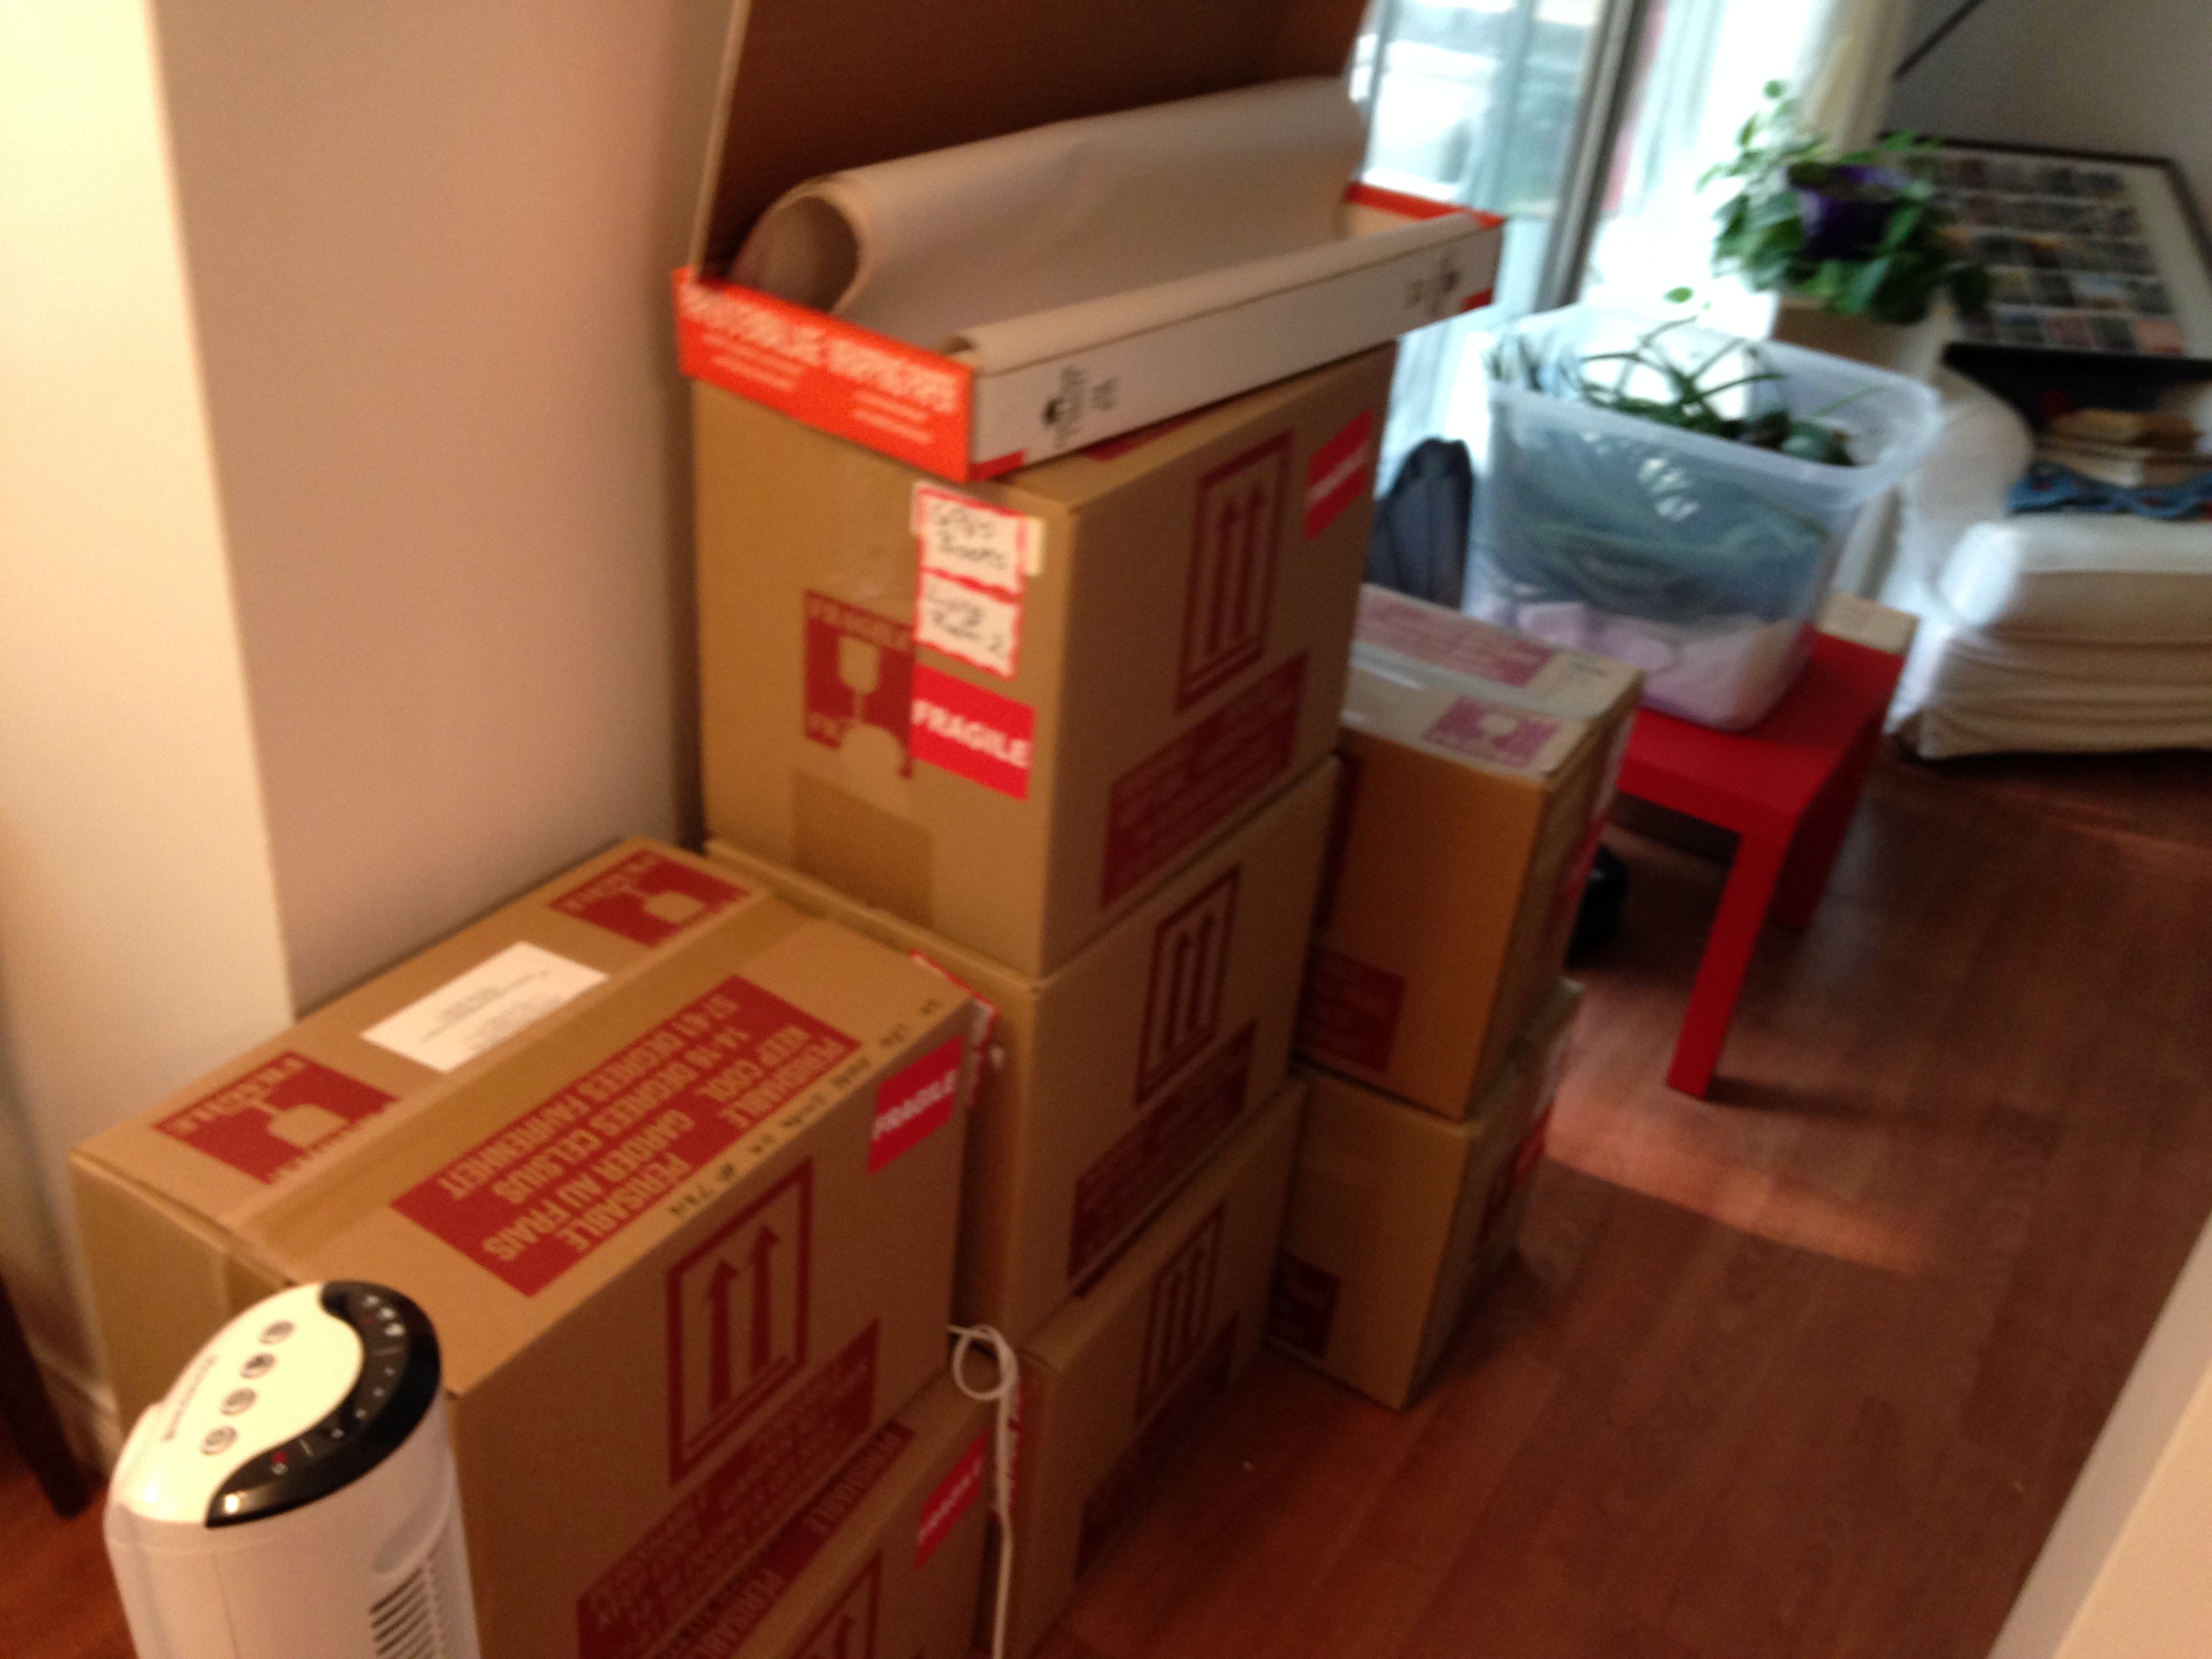 Boxes Piling Up!